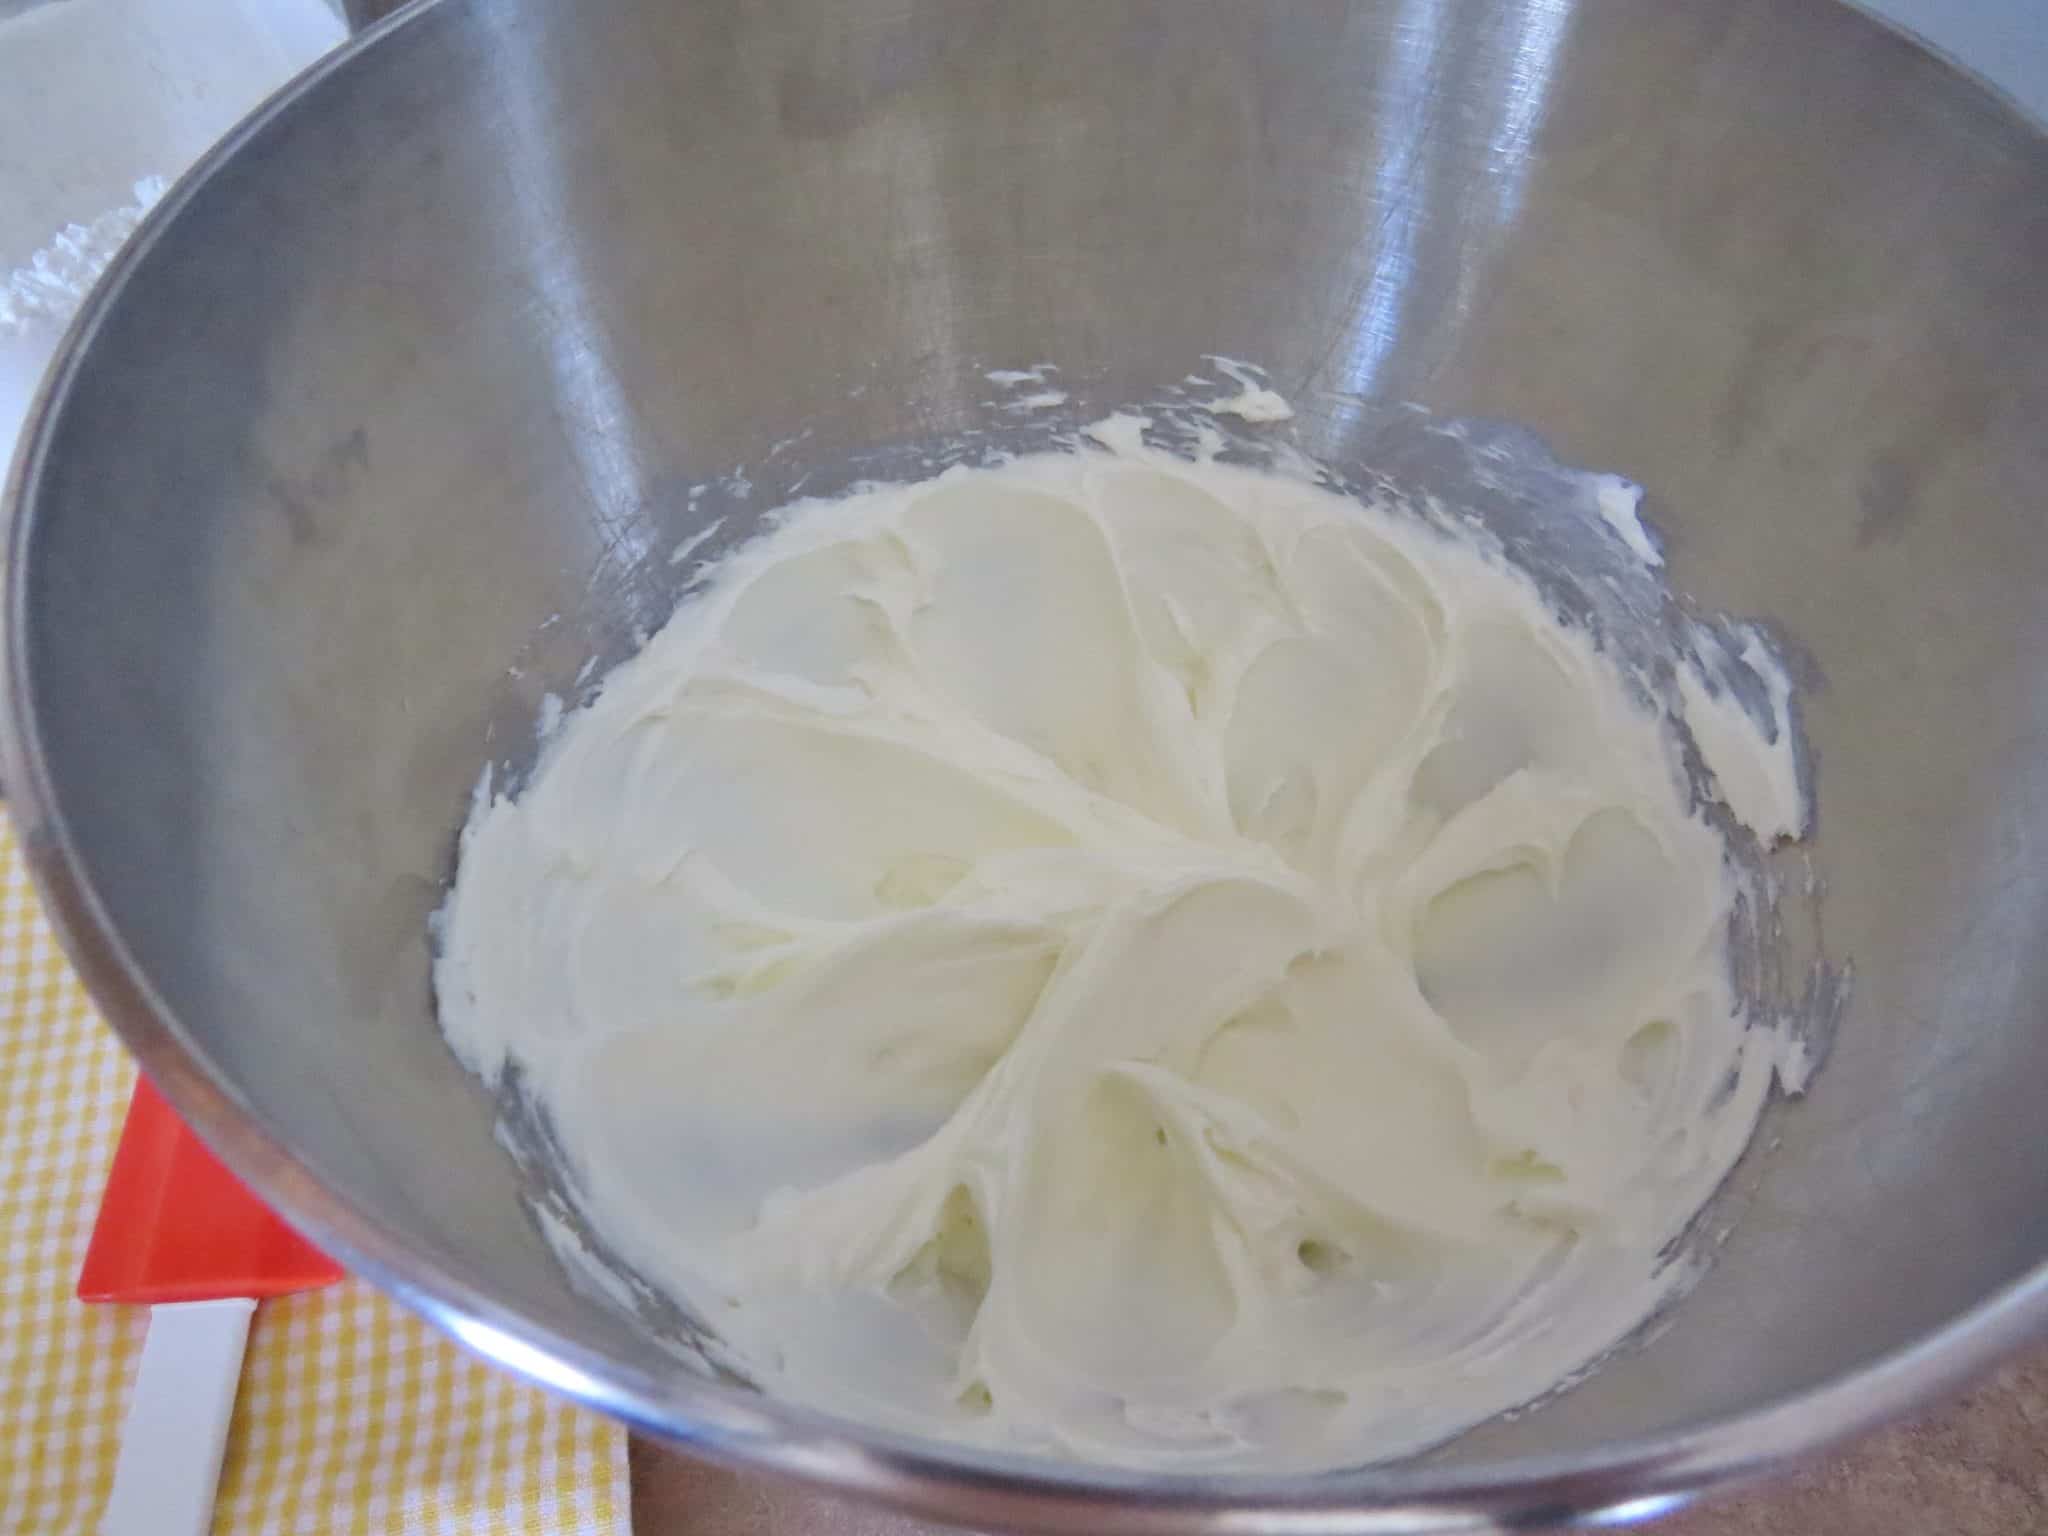 cream cheese and sugar mixed together until smooth (no lumps).